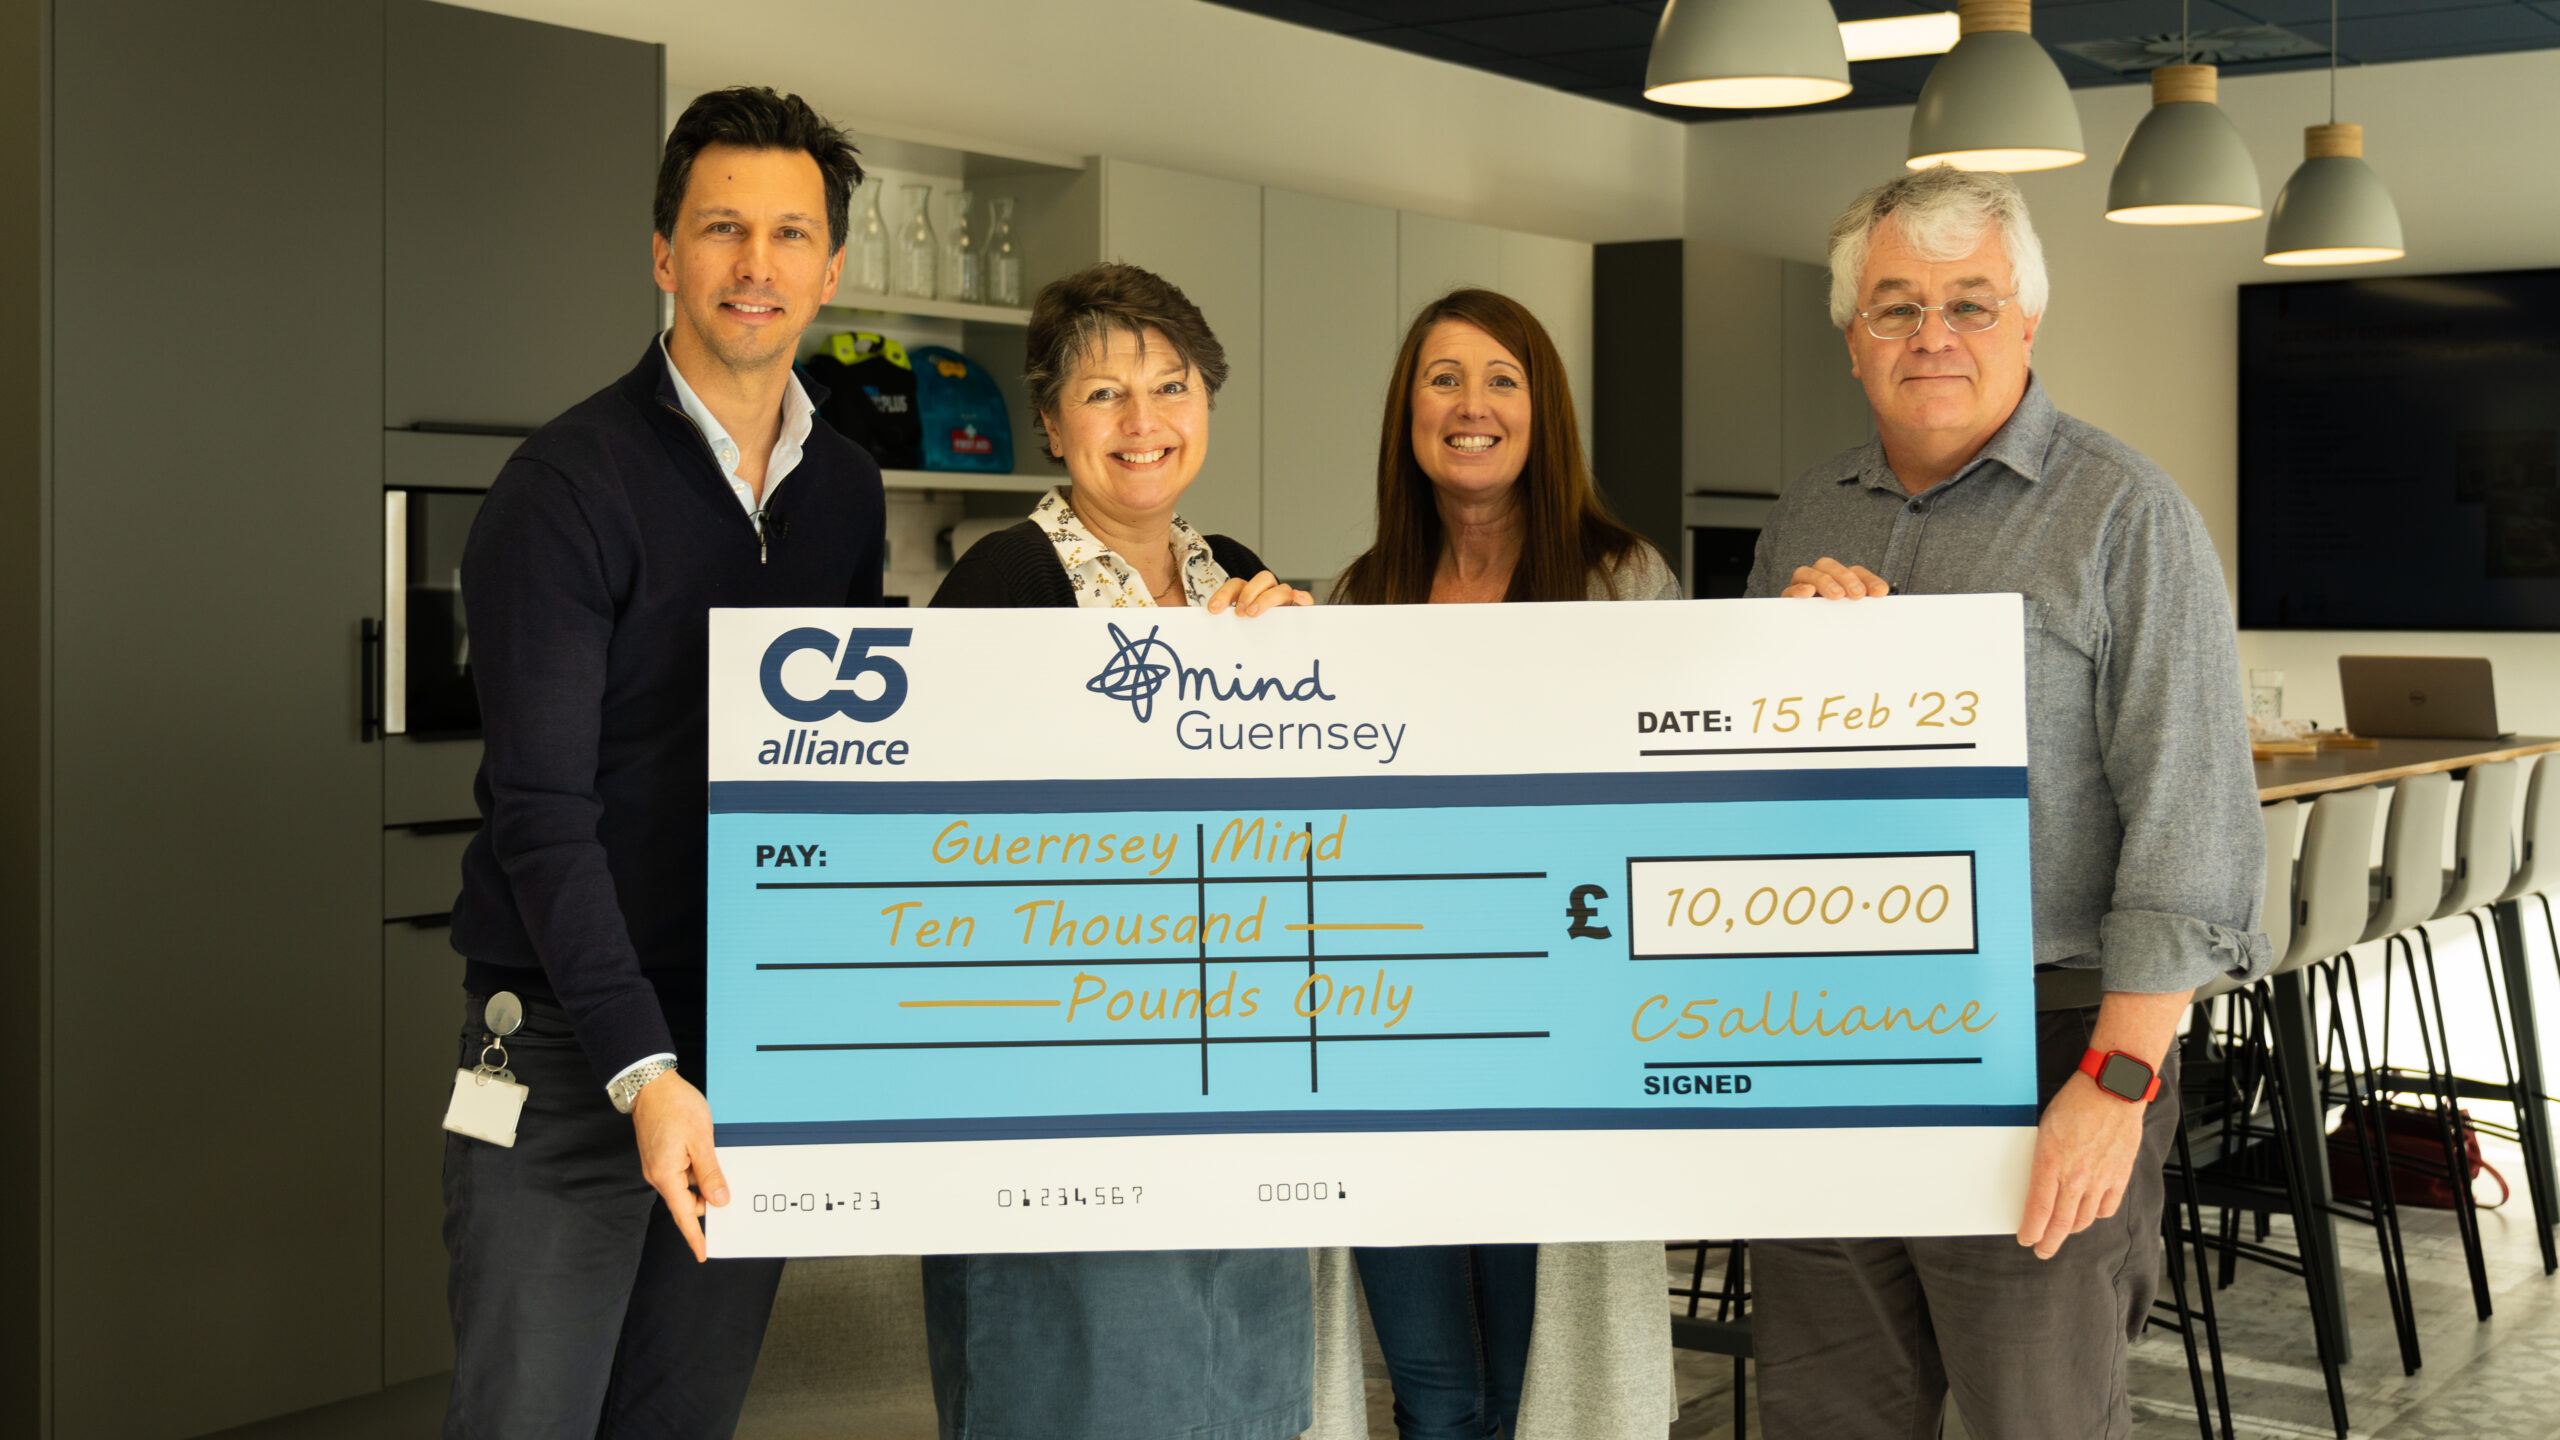 Handing over cheque to Guernsey Mind